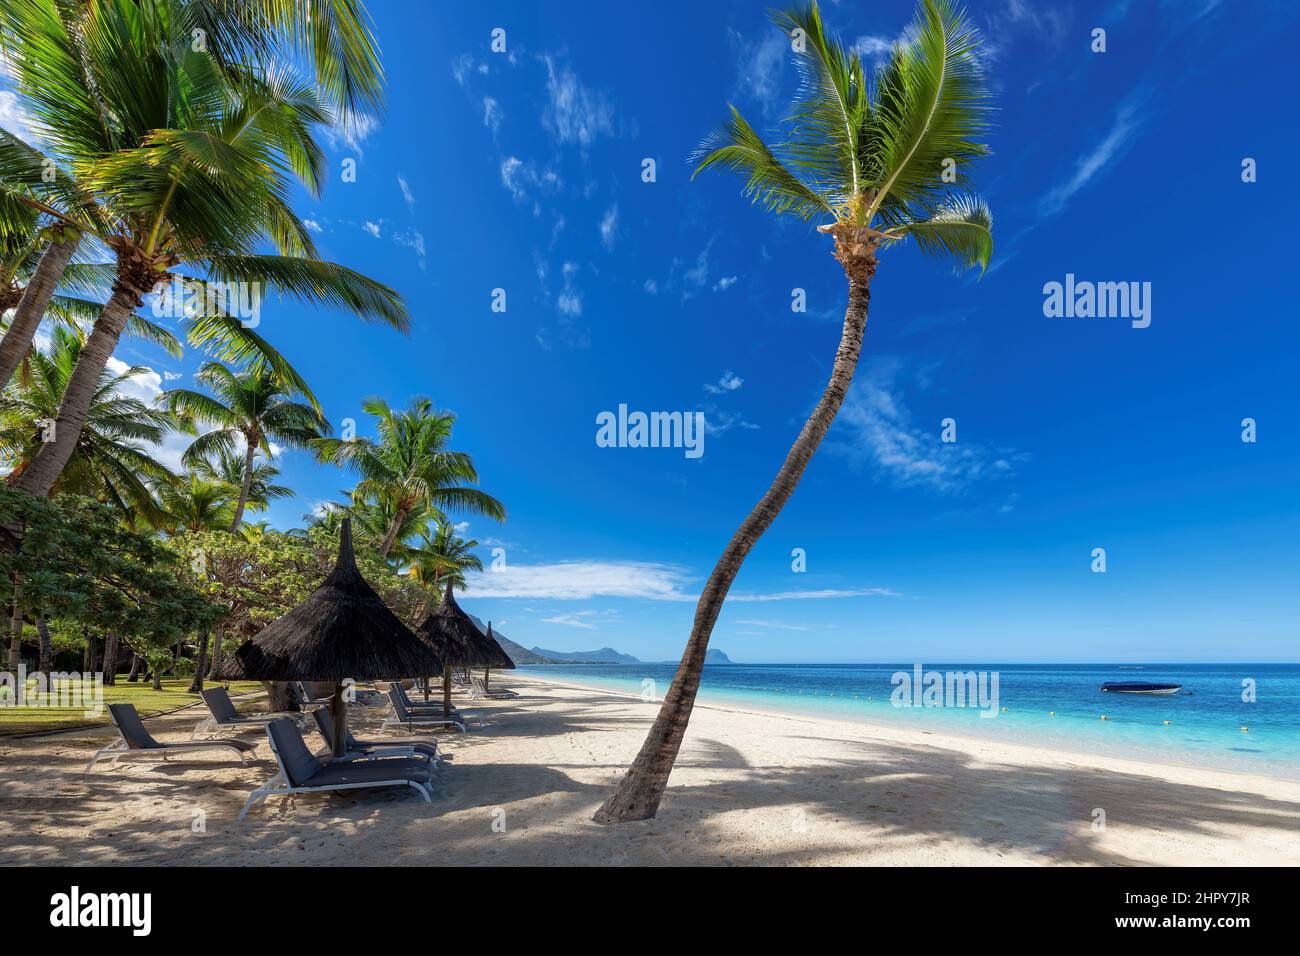 Palm trees in tropical sunny beach resort in Mauritius island. Stock Photo